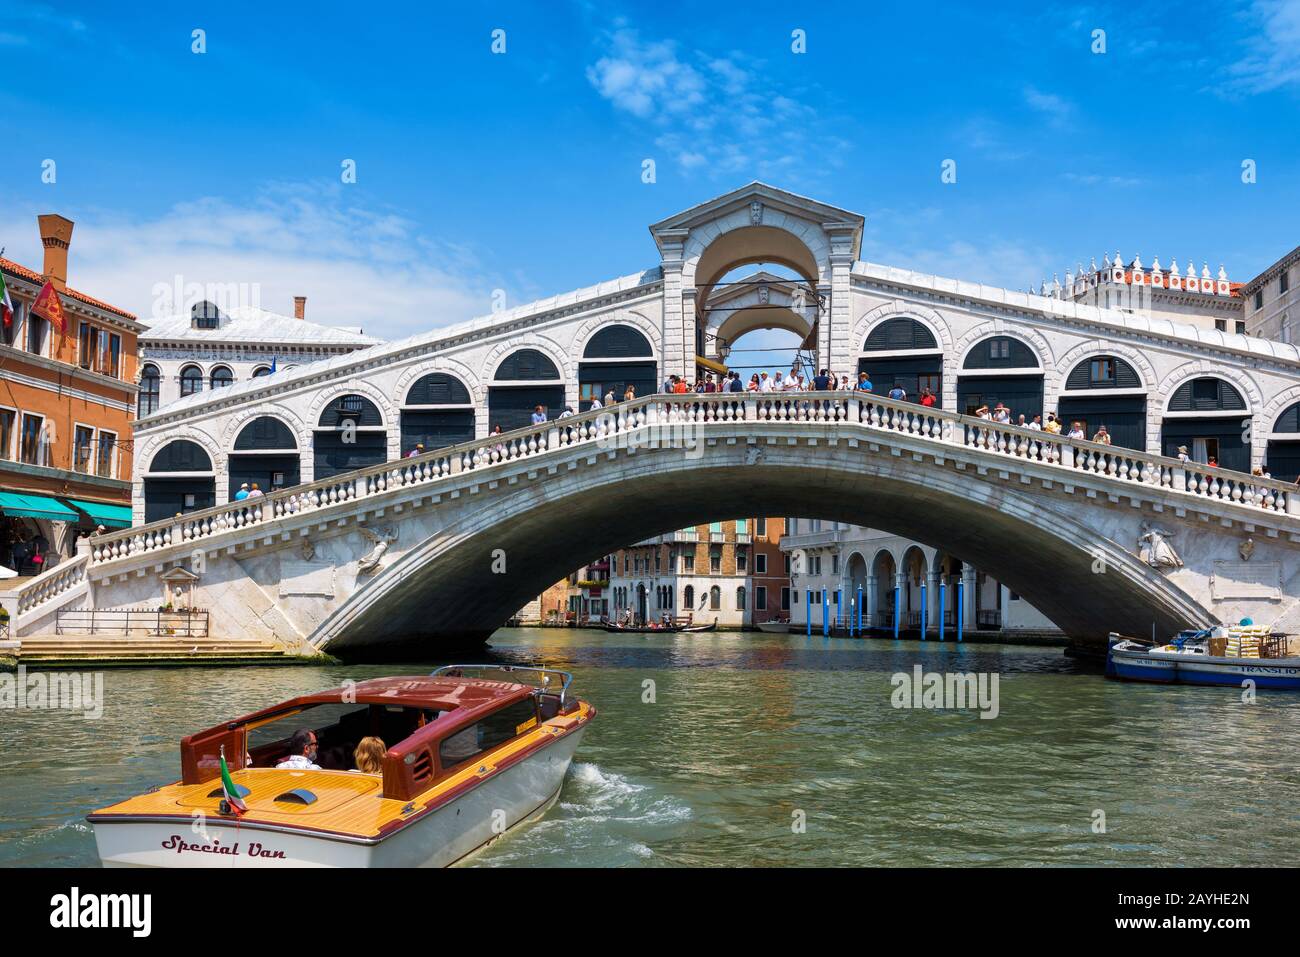 Venice, Italy - May 18, 2017: Water taxis are sailing along the Grand Canal to the Rialto Bridge. Rialto Bridge is one of the main tourist attractions Stock Photo